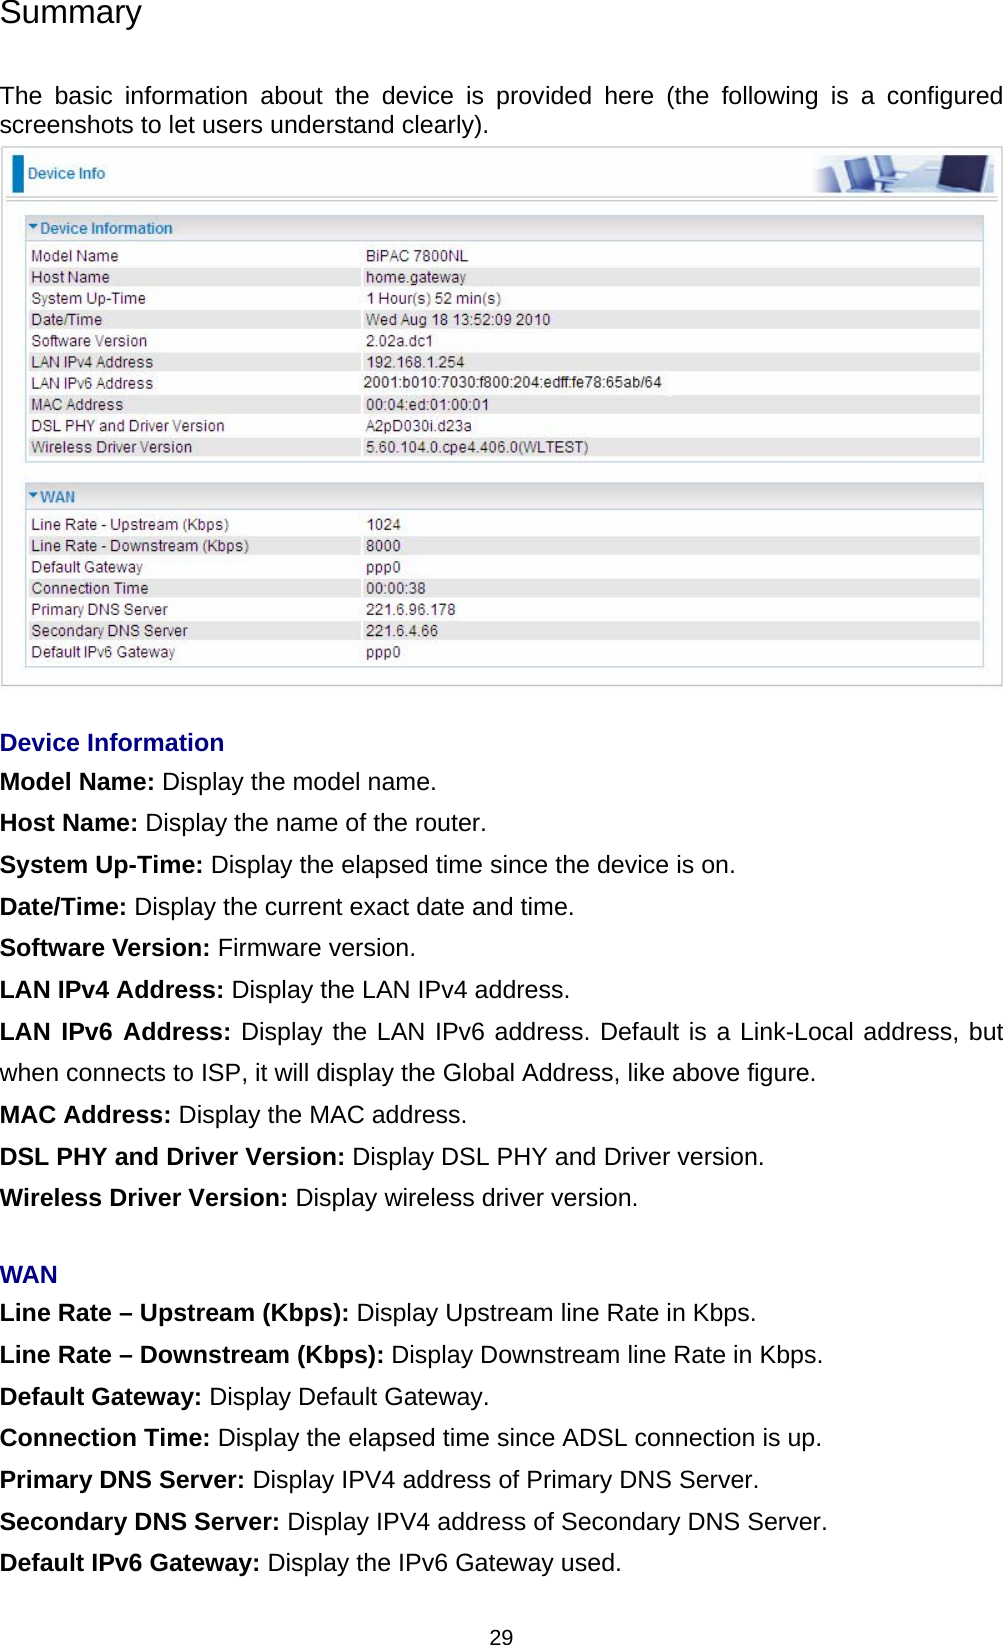  29 Summary  The basic information about the device is provided here (the following is a configured screenshots to let users understand clearly).    Device Information Model Name: Display the model name. Host Name: Display the name of the router. System Up-Time: Display the elapsed time since the device is on. Date/Time: Display the current exact date and time. Software Version: Firmware version.  LAN IPv4 Address: Display the LAN IPv4 address. LAN IPv6 Address: Display the LAN IPv6 address. Default is a Link-Local address, but when connects to ISP, it will display the Global Address, like above figure. MAC Address: Display the MAC address. DSL PHY and Driver Version: Display DSL PHY and Driver version. Wireless Driver Version: Display wireless driver version.    WAN Line Rate – Upstream (Kbps): Display Upstream line Rate in Kbps. Line Rate – Downstream (Kbps): Display Downstream line Rate in Kbps. Default Gateway: Display Default Gateway.  Connection Time: Display the elapsed time since ADSL connection is up. Primary DNS Server: Display IPV4 address of Primary DNS Server. Secondary DNS Server: Display IPV4 address of Secondary DNS Server. Default IPv6 Gateway: Display the IPv6 Gateway used. 